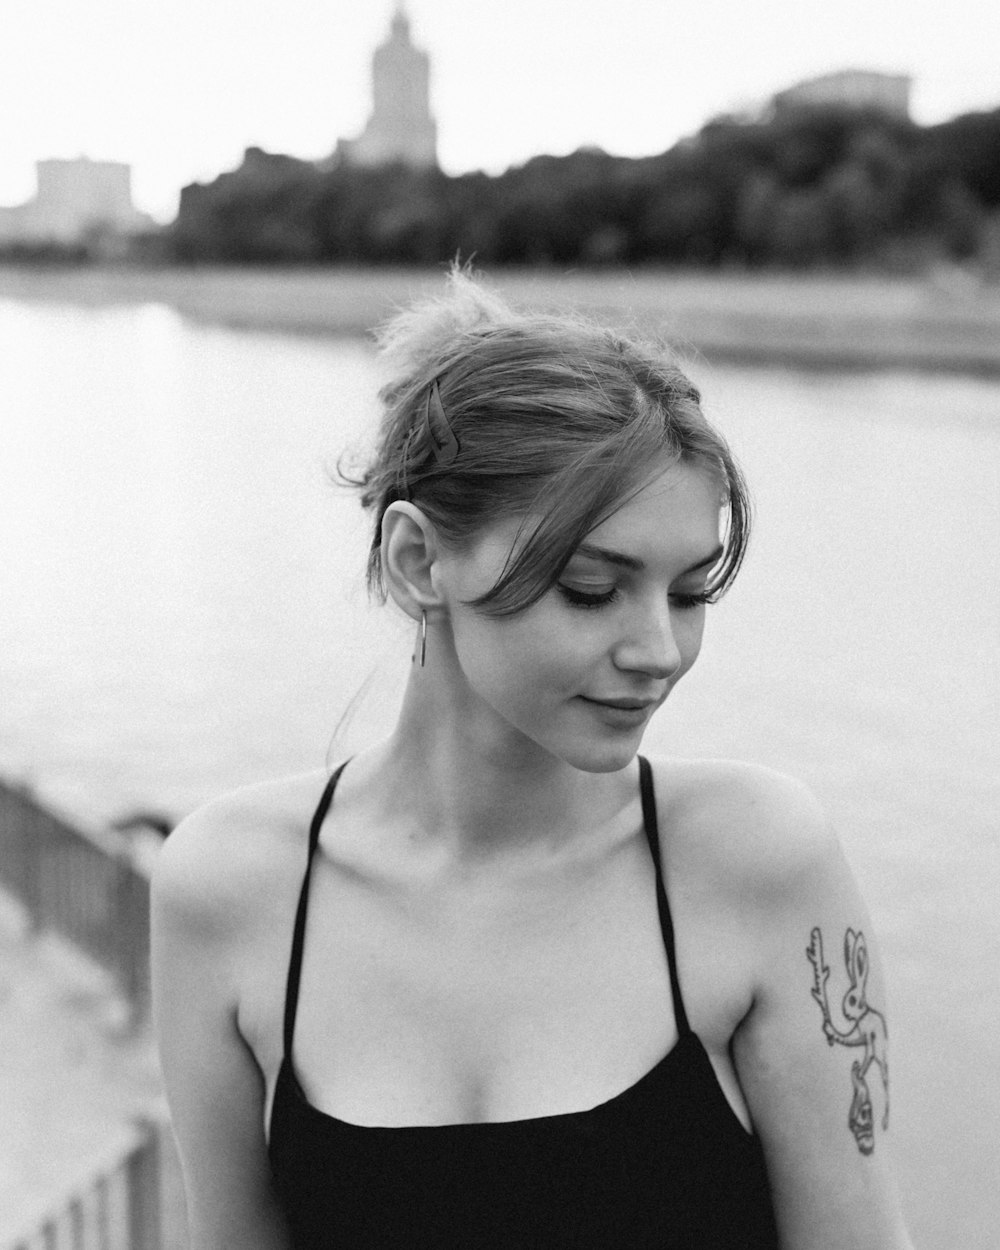 a woman with a tattoo on her arm by a body of water